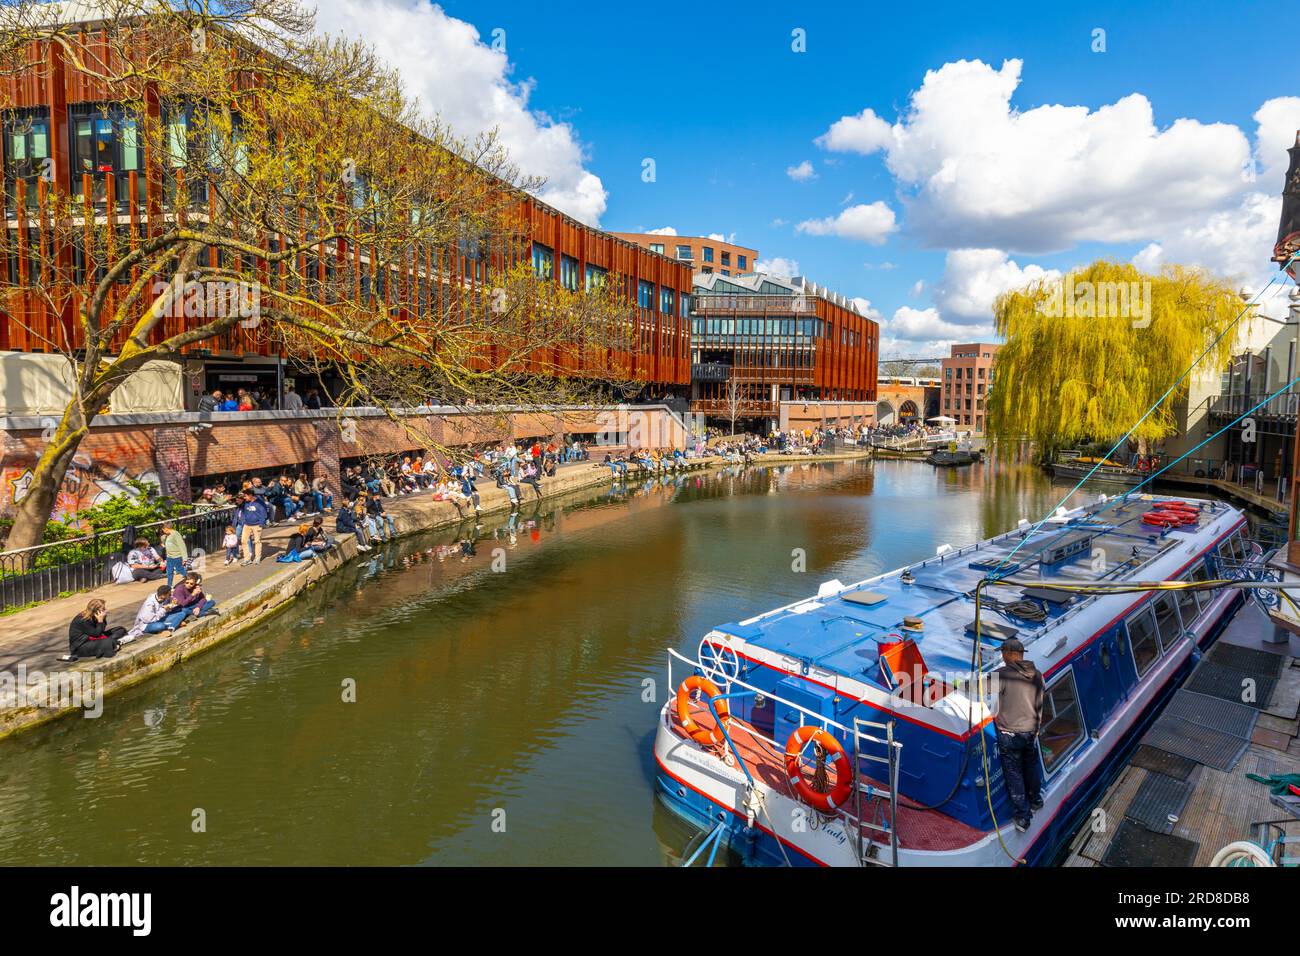 Camden Lock Area, bateau canal, Regent's Canal, Londres, Angleterre, Royaume-Uni, Europe Banque D'Images